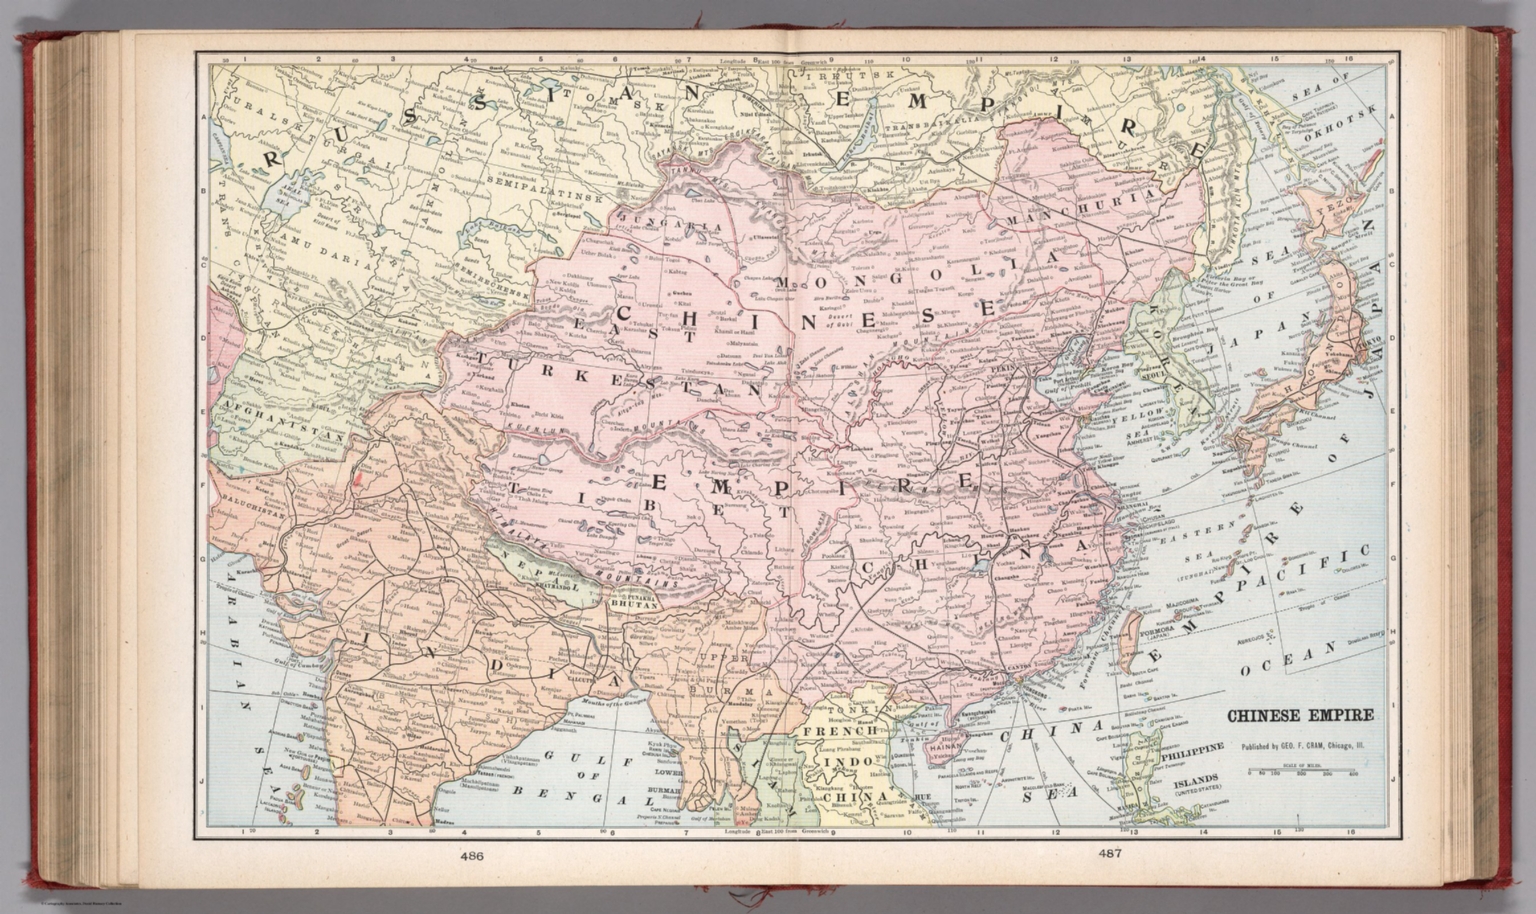 Chinese Empire - David Rumsey Historical Map Collection